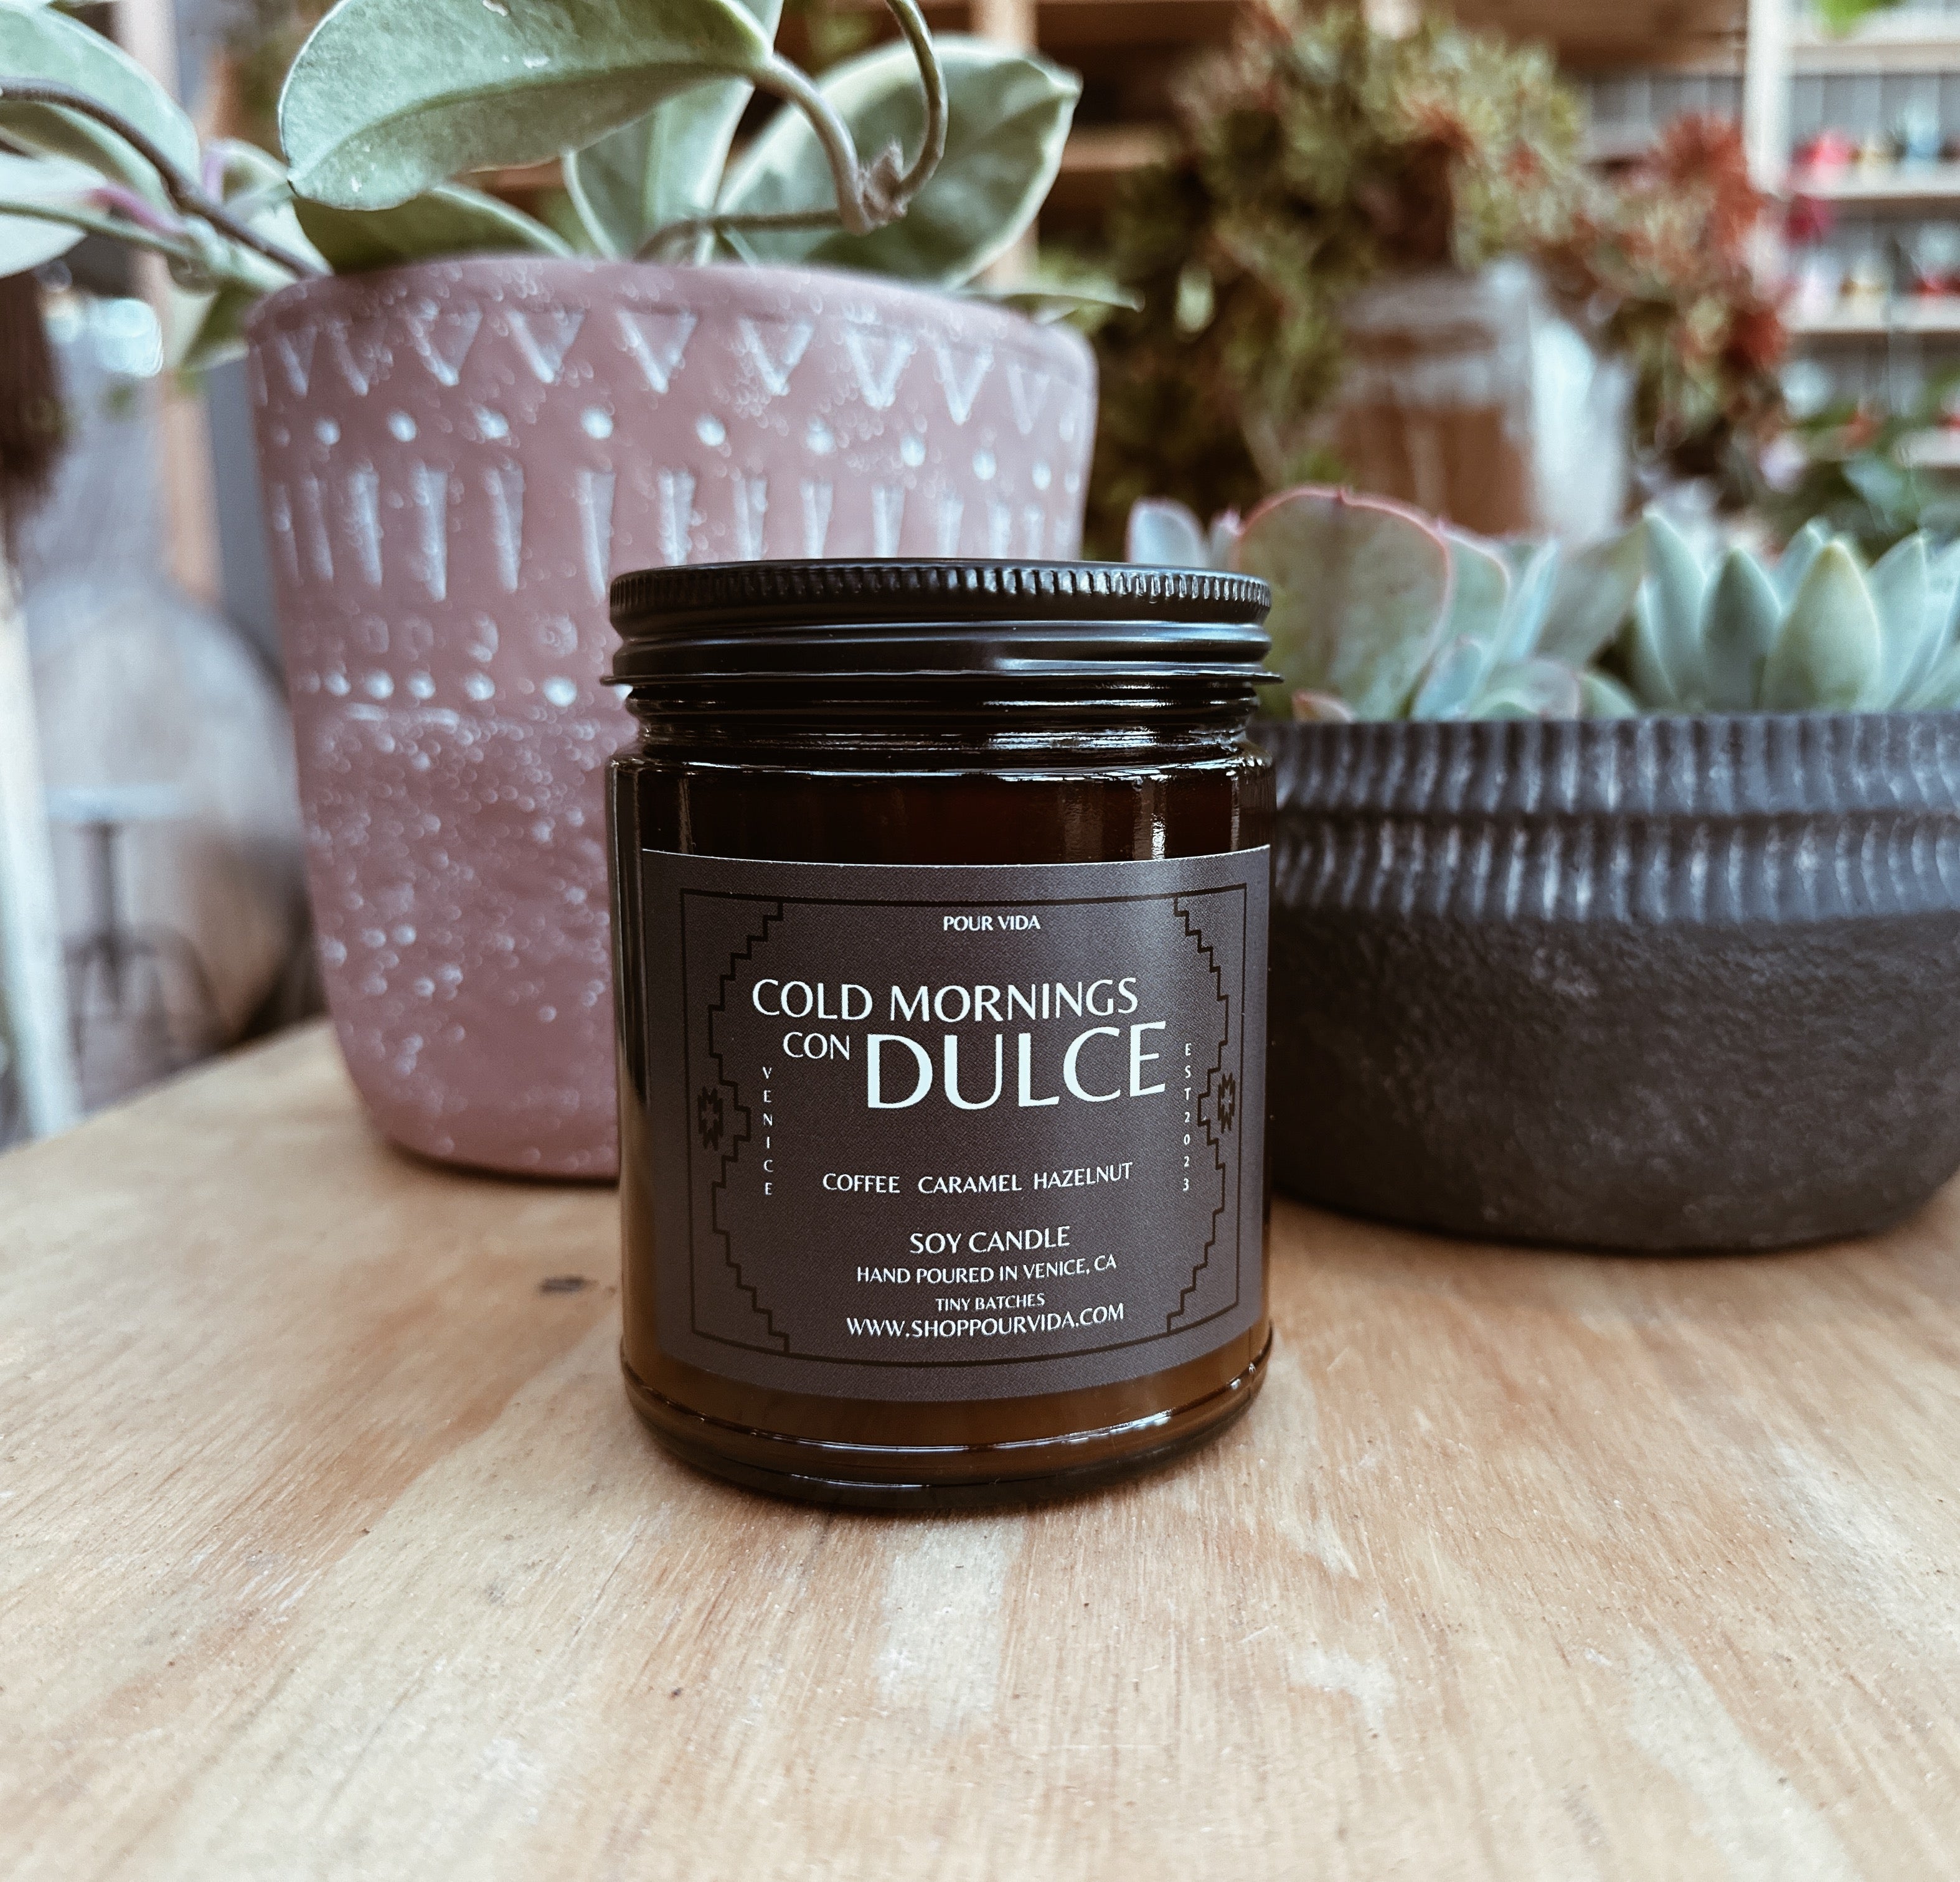 Cold Mornings Con Dulce Candle, 8oz